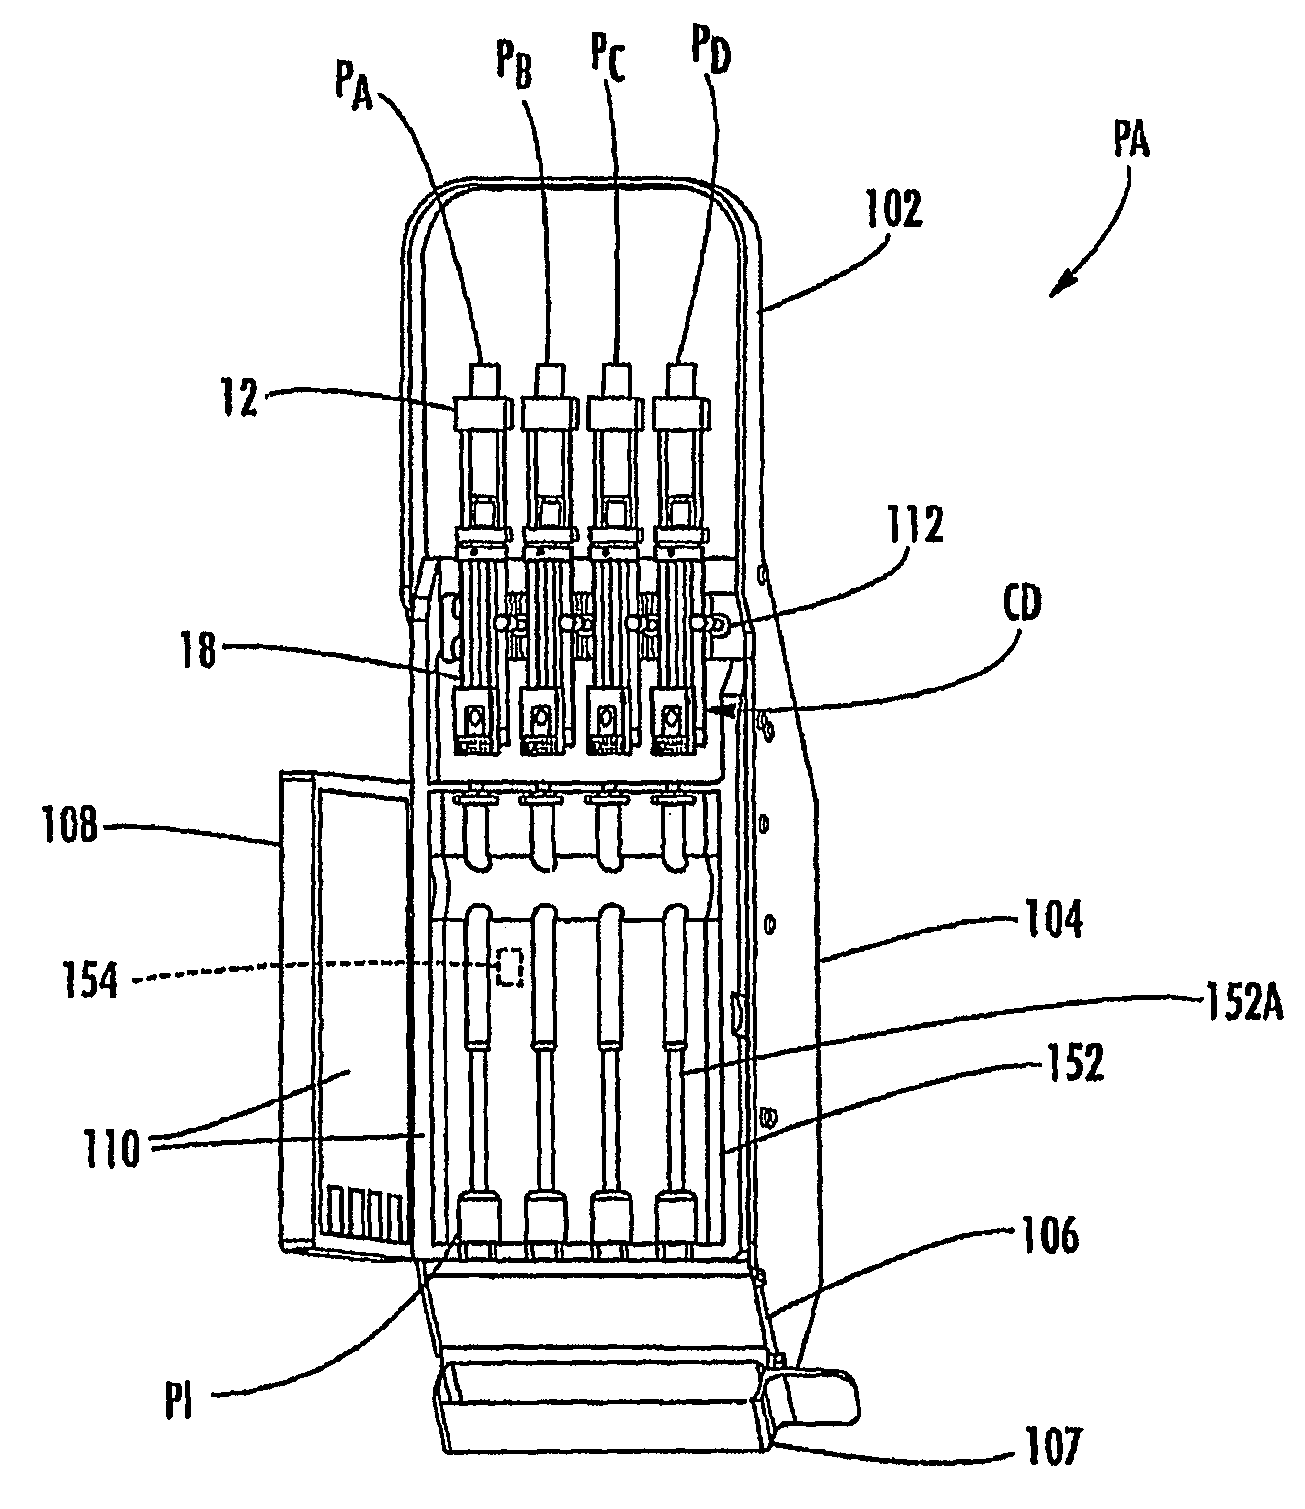 Apparatus and method for handling fluids at nano-scale rates